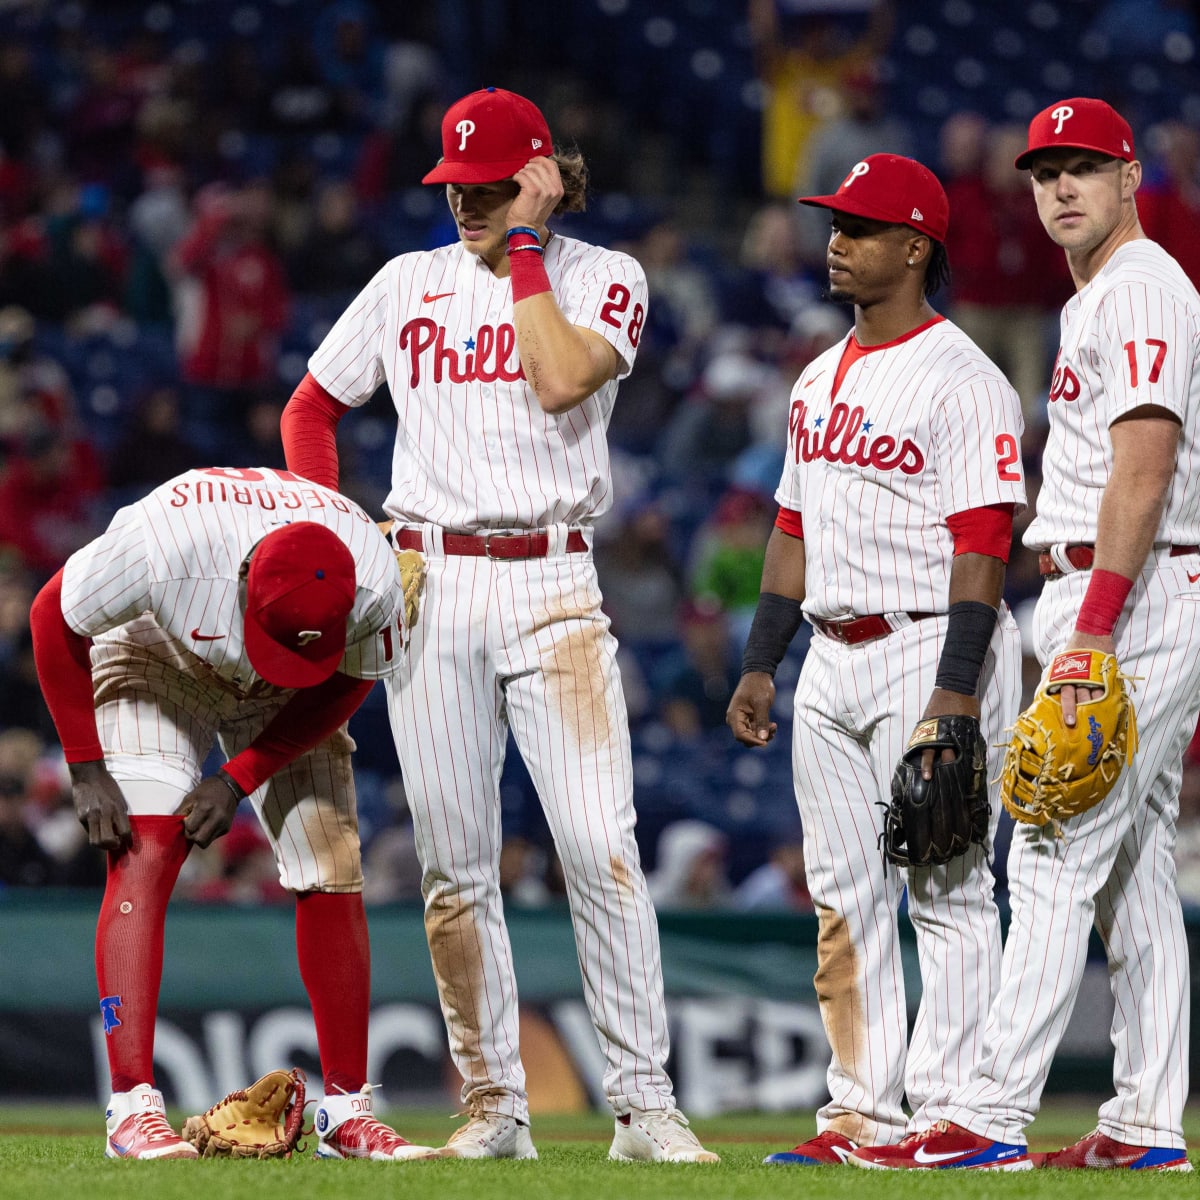 Philadelphia Phillies Lineup Gets Major Shake-Up Ahead of Texas Rangers  Series, Alec Bohm Kyle Schwarber Lead Off - Sports Illustrated Inside The  Phillies